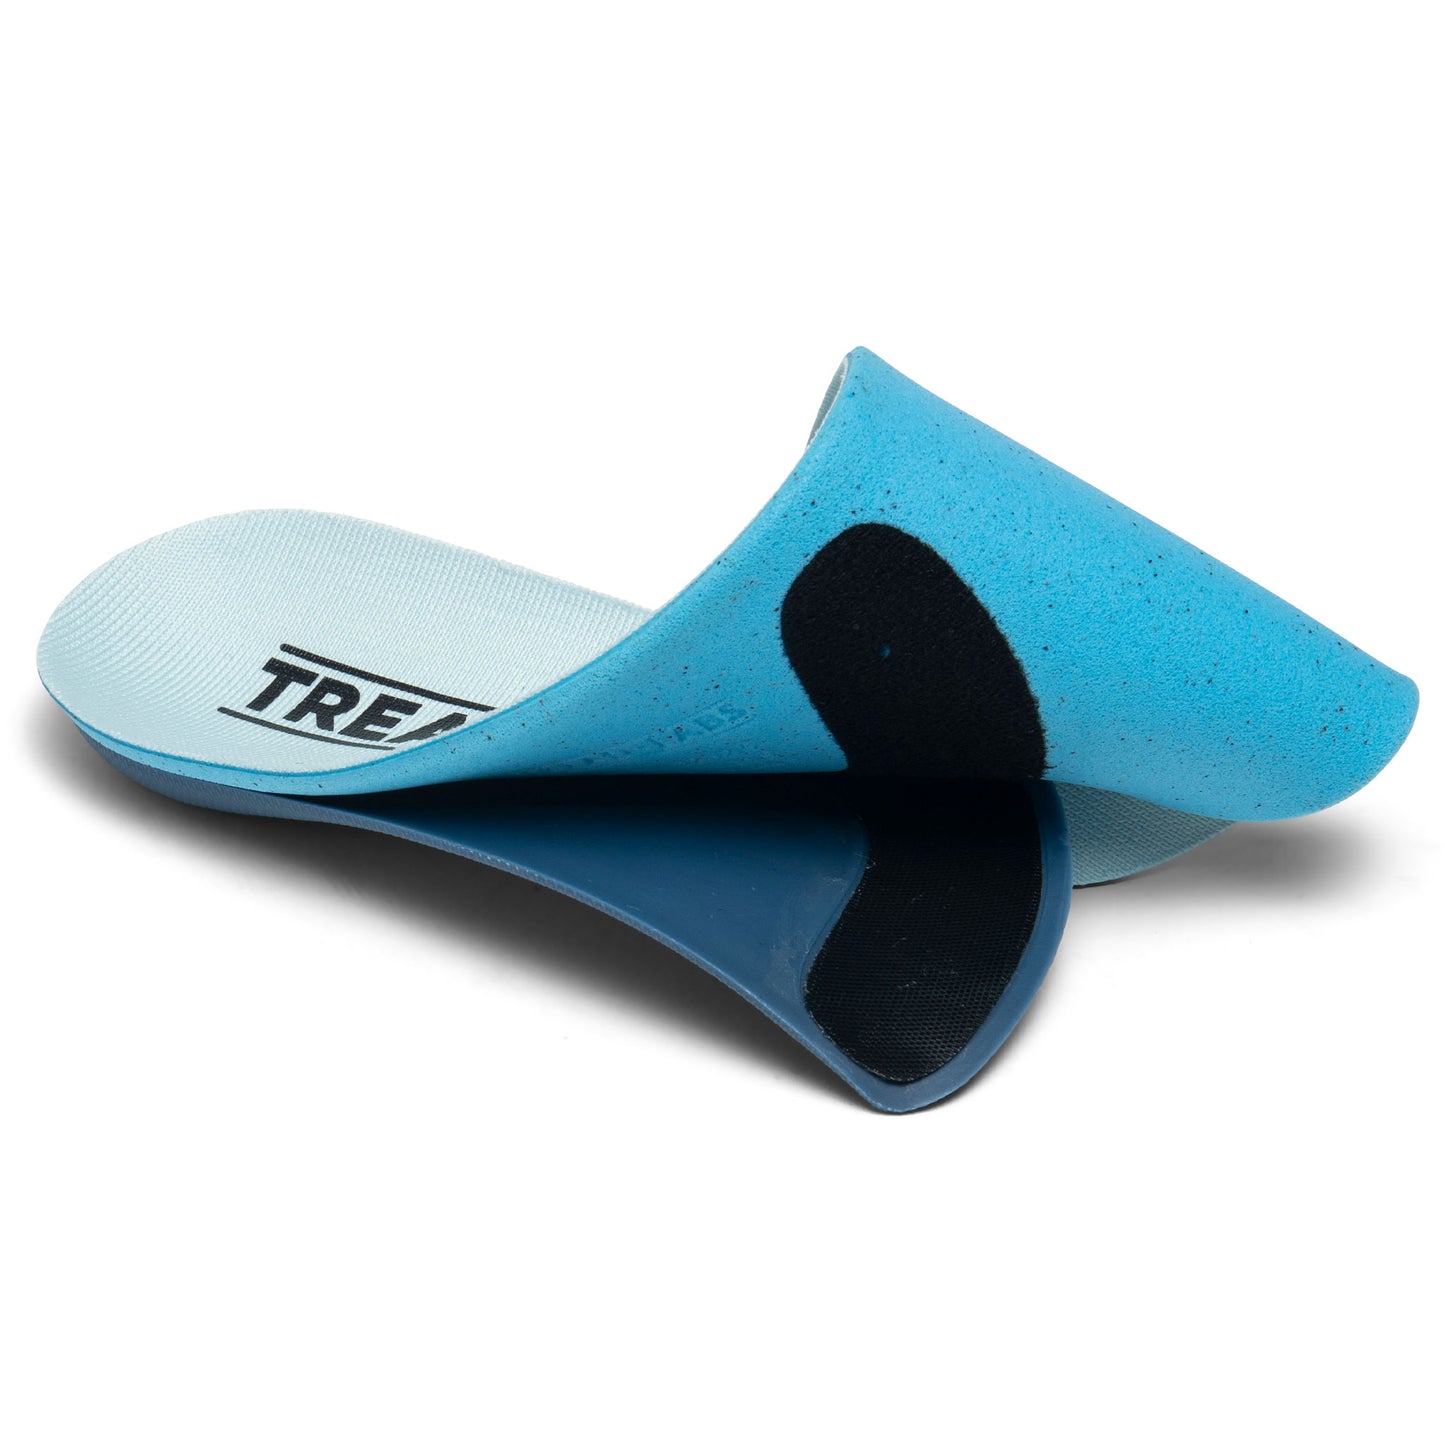 Tread Labs Pace Thin Two Part Insole System - Arch Support And Top Cover